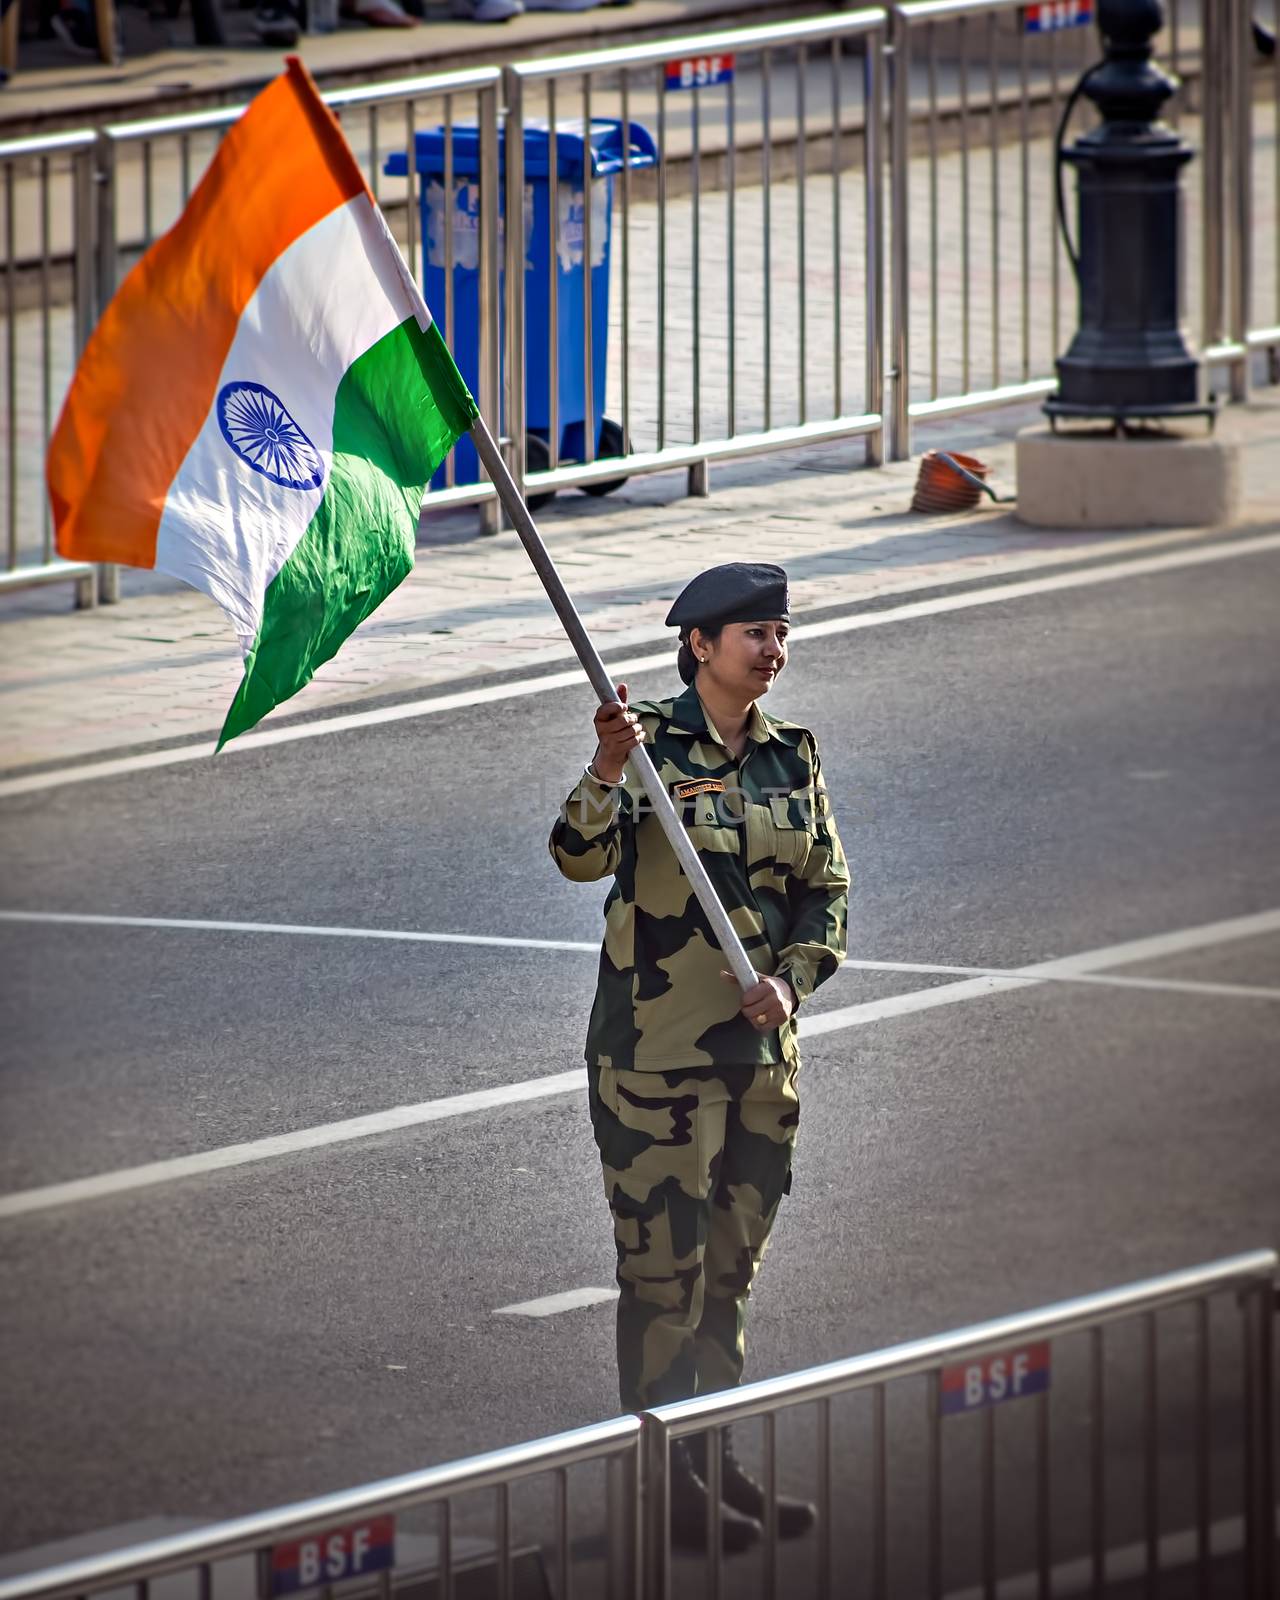 Wagah border, Punjab,  India - April 14th, 2019 : A lady officer of Indian Border Security Force, waving Indian National Flag during evening military drill jointly done by Indian & Pakistani forces.